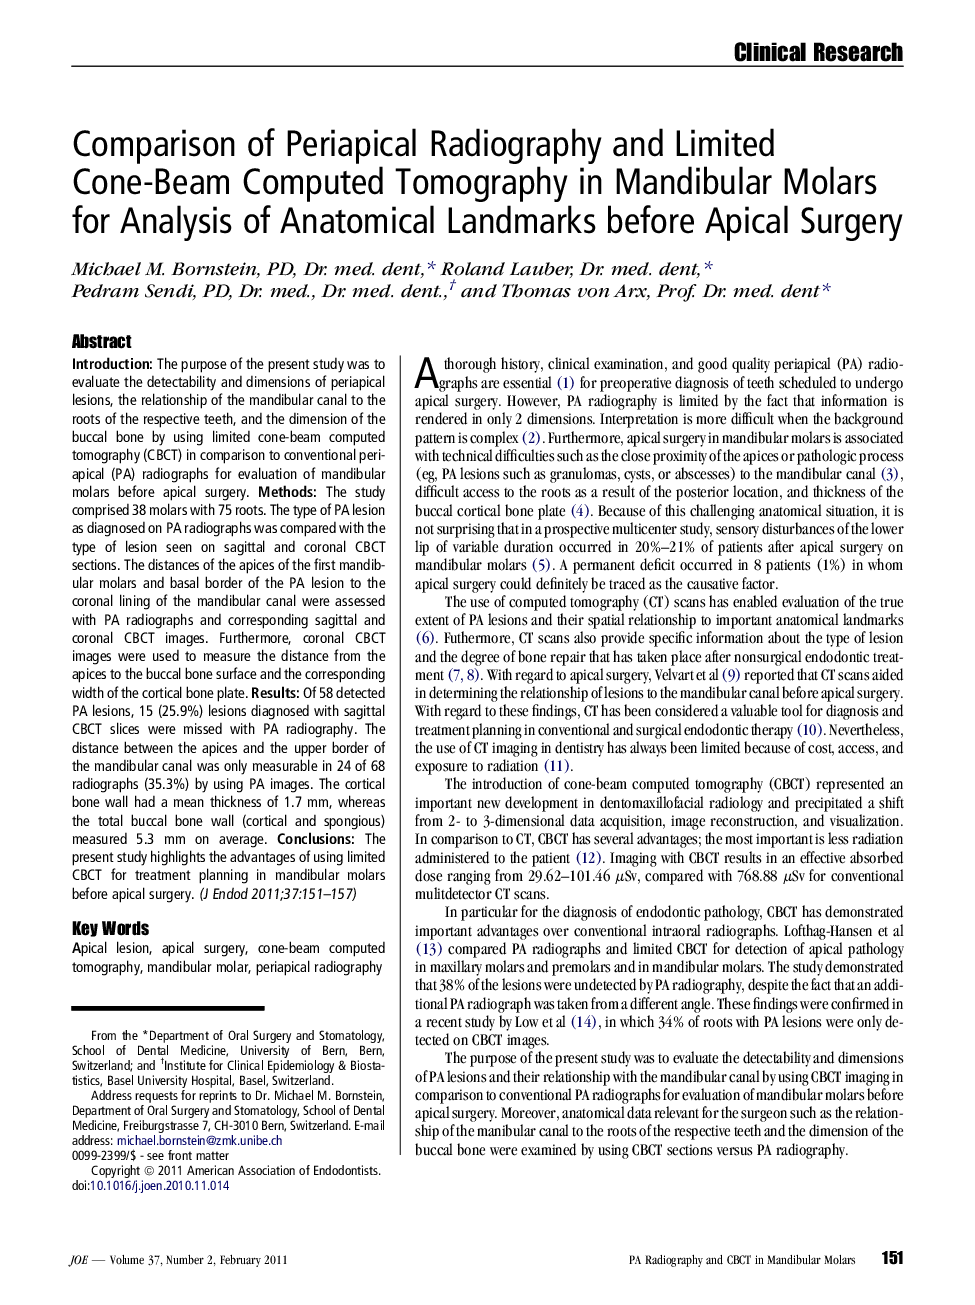 Comparison of Periapical Radiography and Limited Cone-Beam Computed Tomography in Mandibular Molars for Analysis of Anatomical Landmarks before Apical Surgery